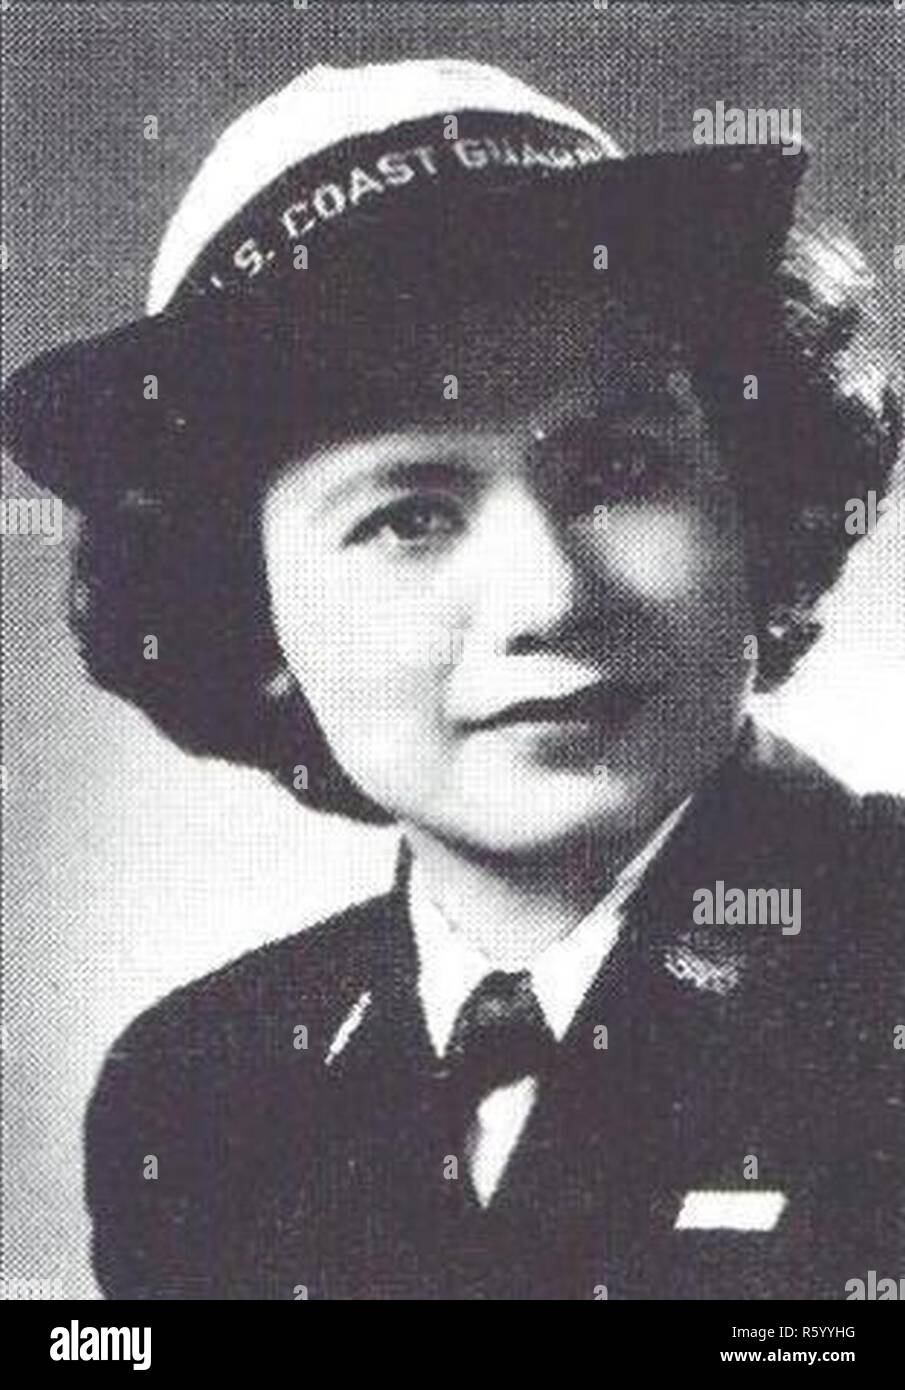 Florence Ebersole Smith Finch (1915-2016) joined the Coast Guard Women's Reserve, SPARs, in 1945 after arriving in the United States from the Philippines where she worked as a civilian stenographer for the Office of Army Intelligence during World War II. She later received the Medal of Freedom for risking her life to secretly furnish money and supplies to American prisoners after Japan took control of Manila, Philippines. Stock Photo